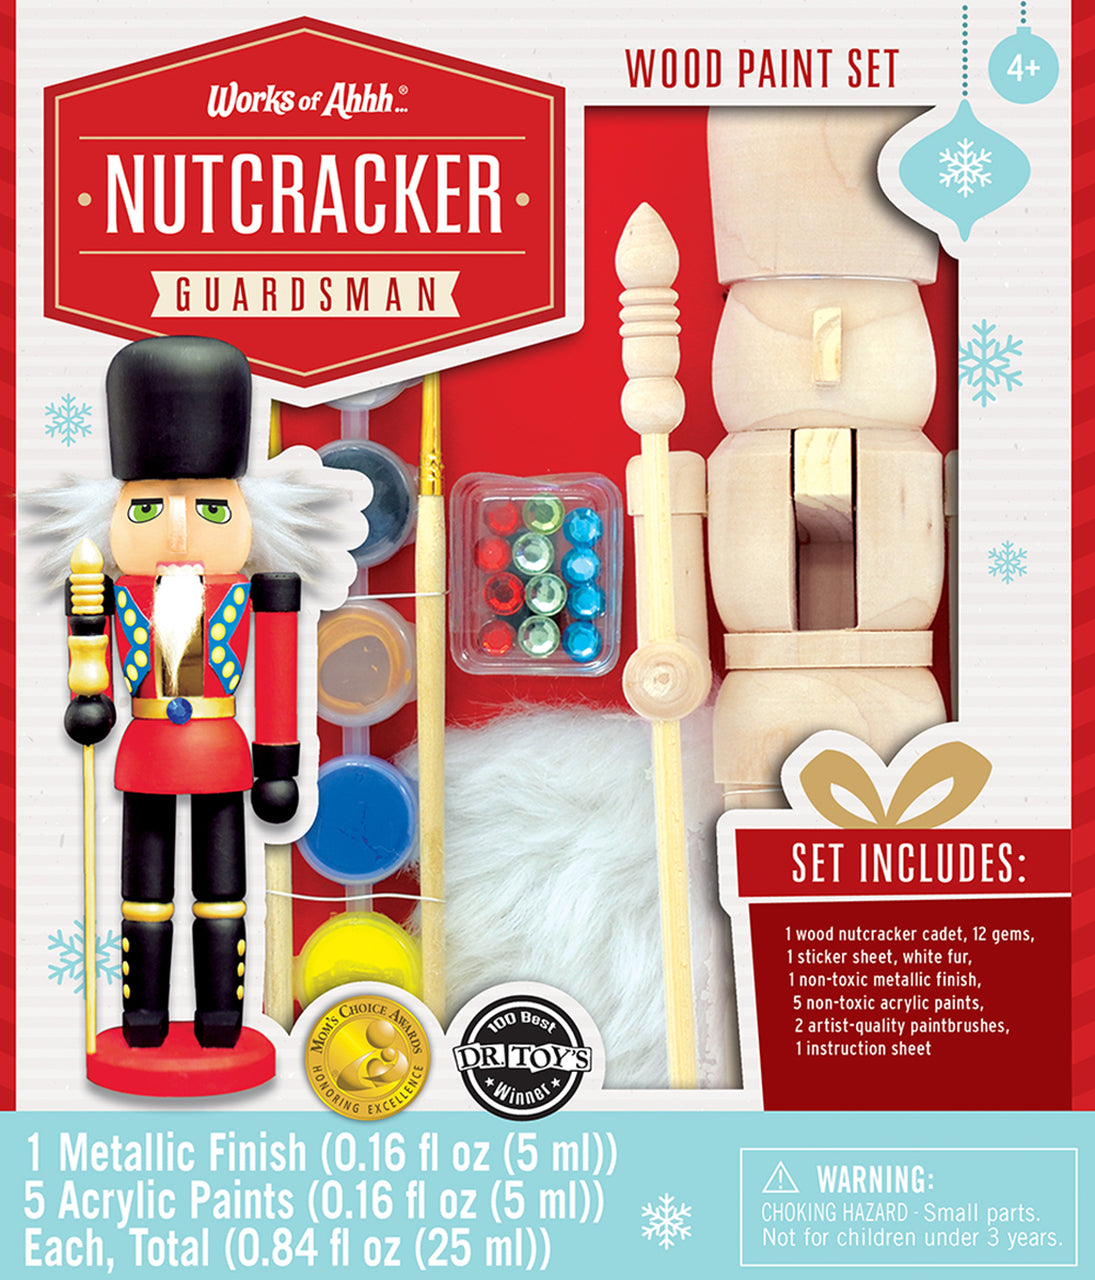 Nutcracker Guardsman Holiday Wood Paint Kit by Masterpieces